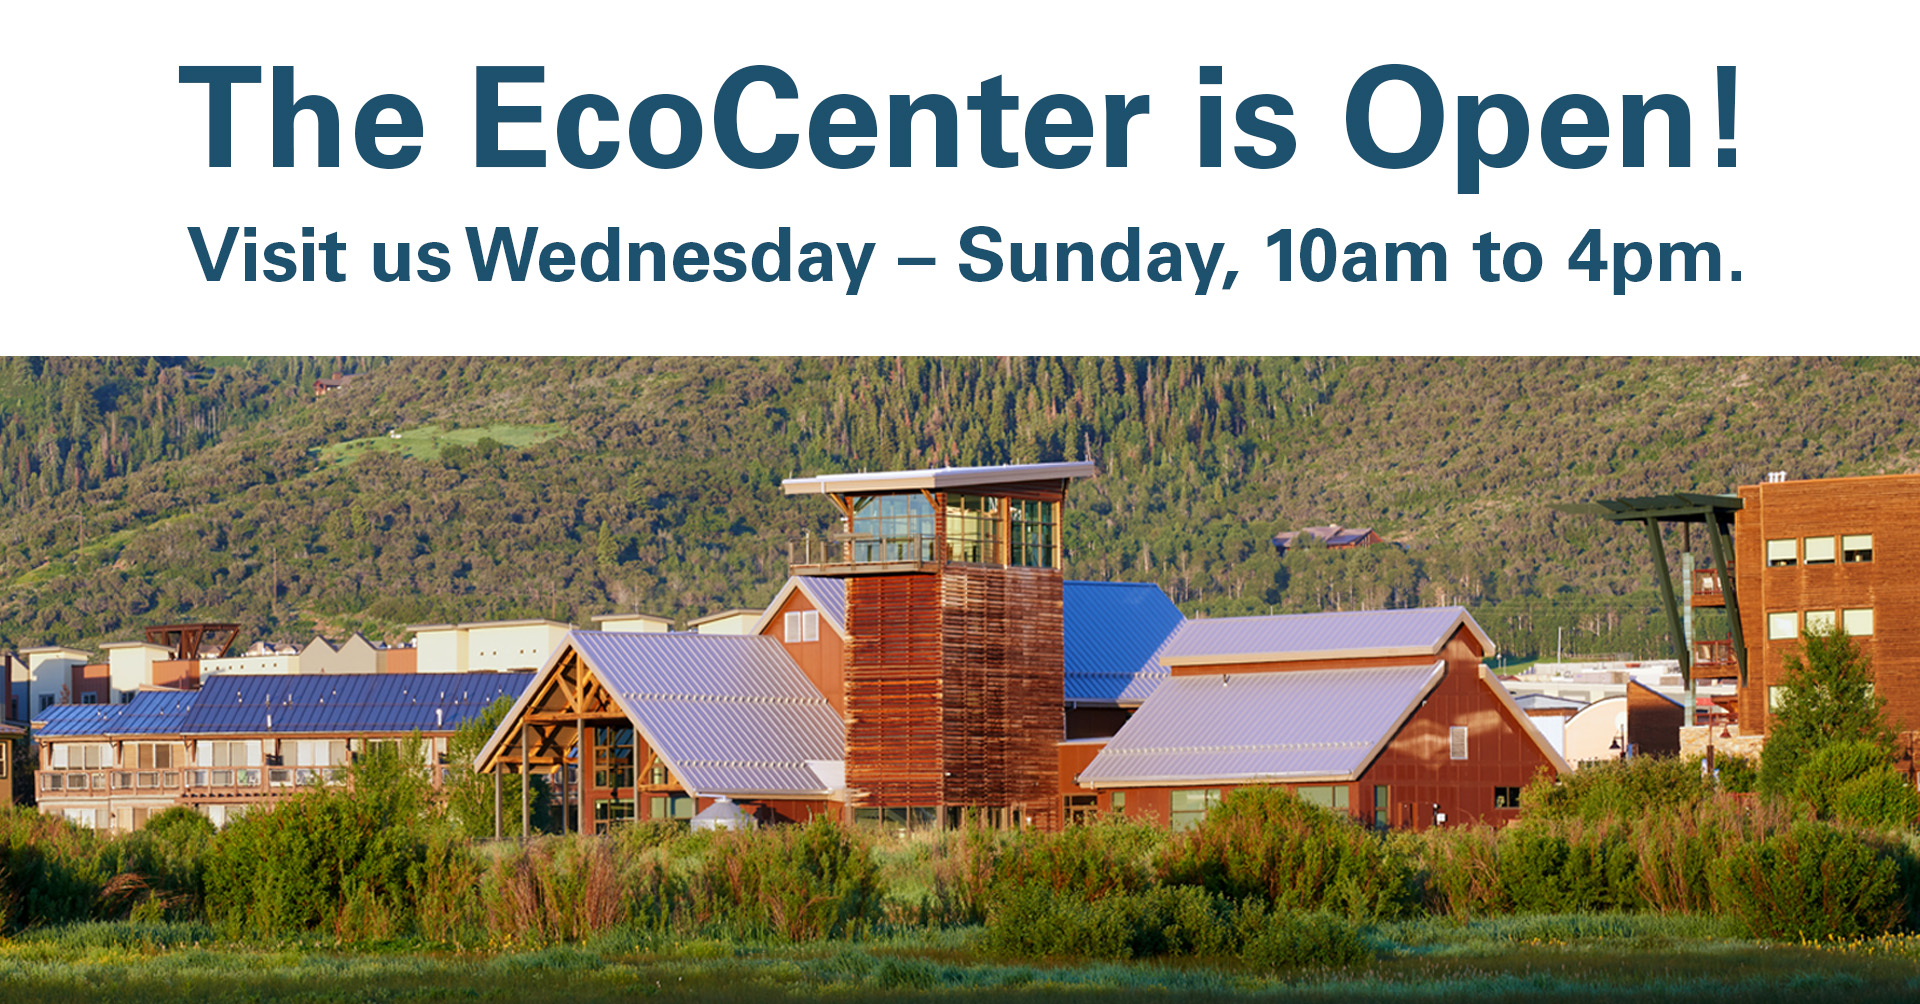 The EcoCenter is open! Visit us Wednesday-Sunday, 10 am - 4 pm